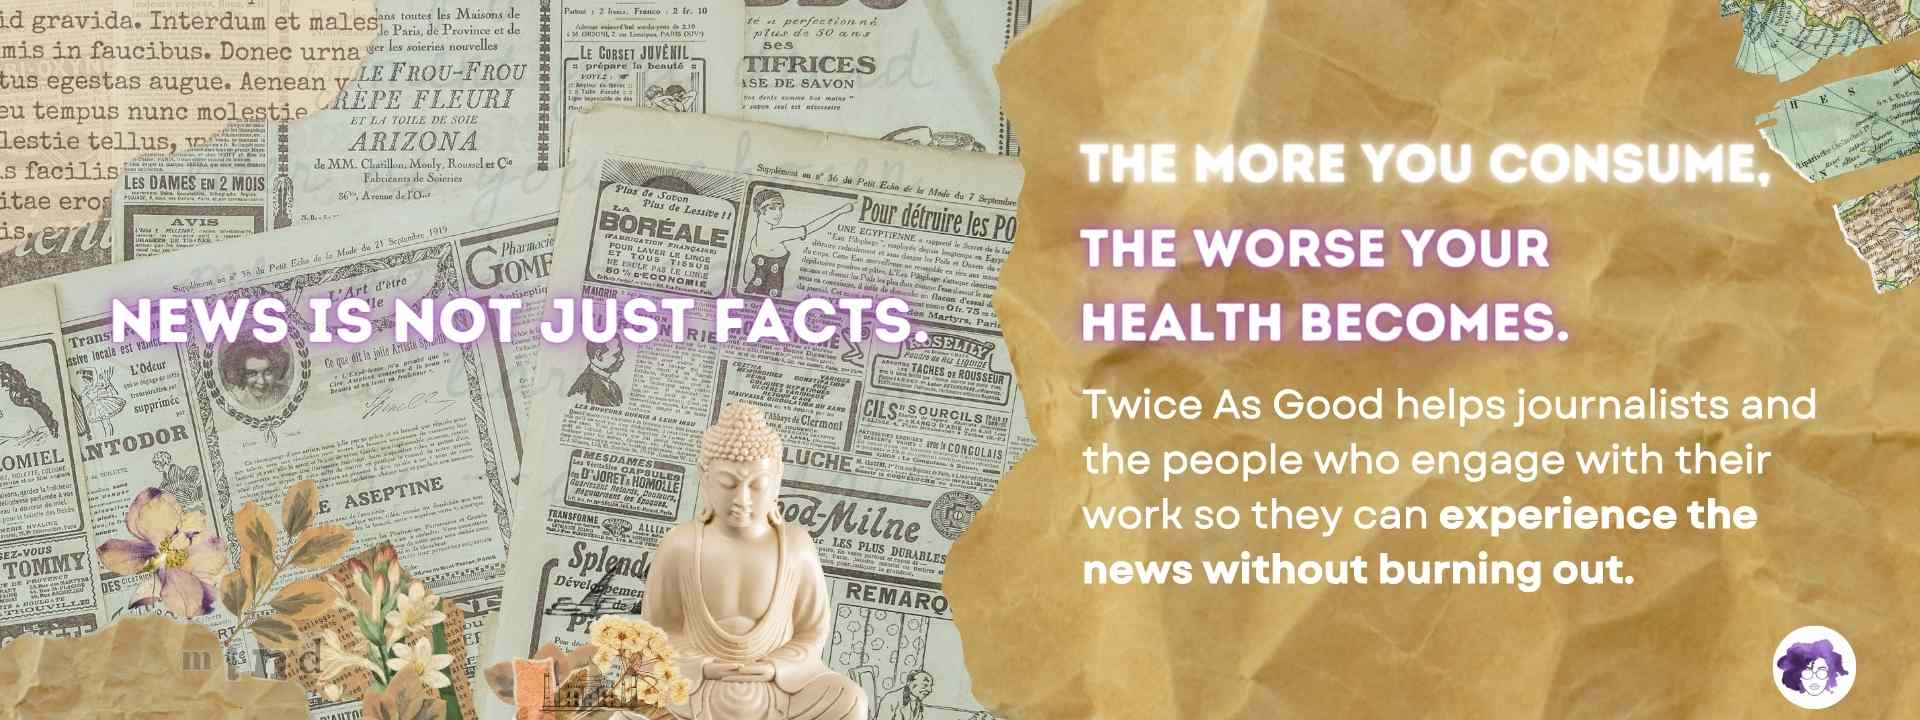 News is not just facts. The more you consume, the worse your health becomes. Twice As Good helps journalists and the people who engage with their work so they can experience the news without burning out.